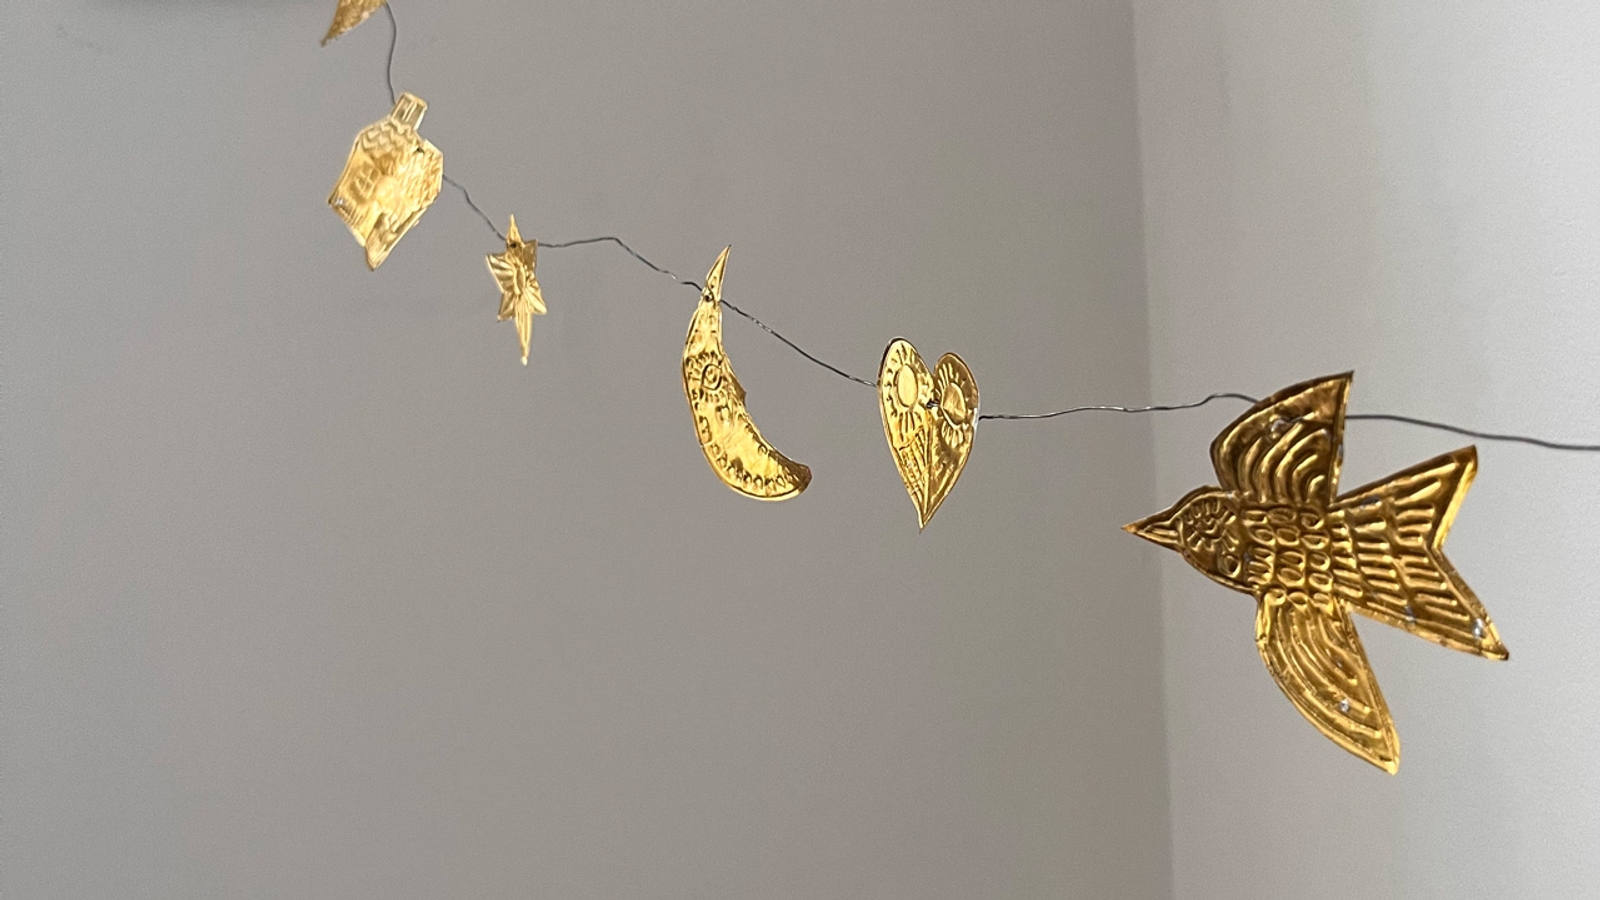 A wire with golden foil Christmas decorations